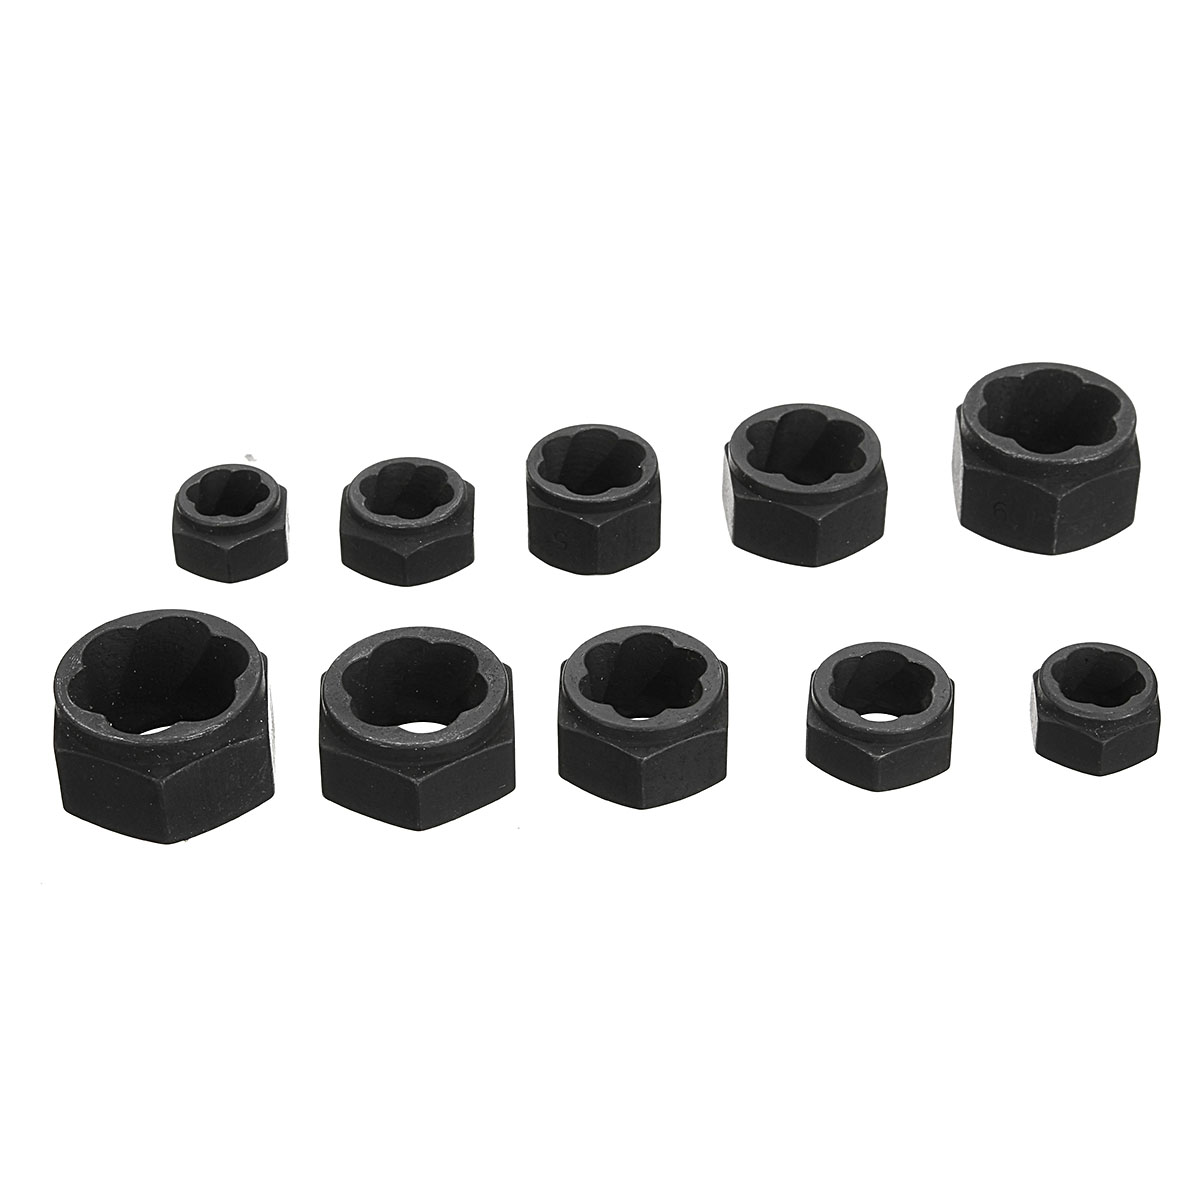 MTGATHER 10Pcs Damaged Bolt Nut Screw Remover Extractor Removal Set Nut Removal Socket Tool Black 9-19mm Best Price